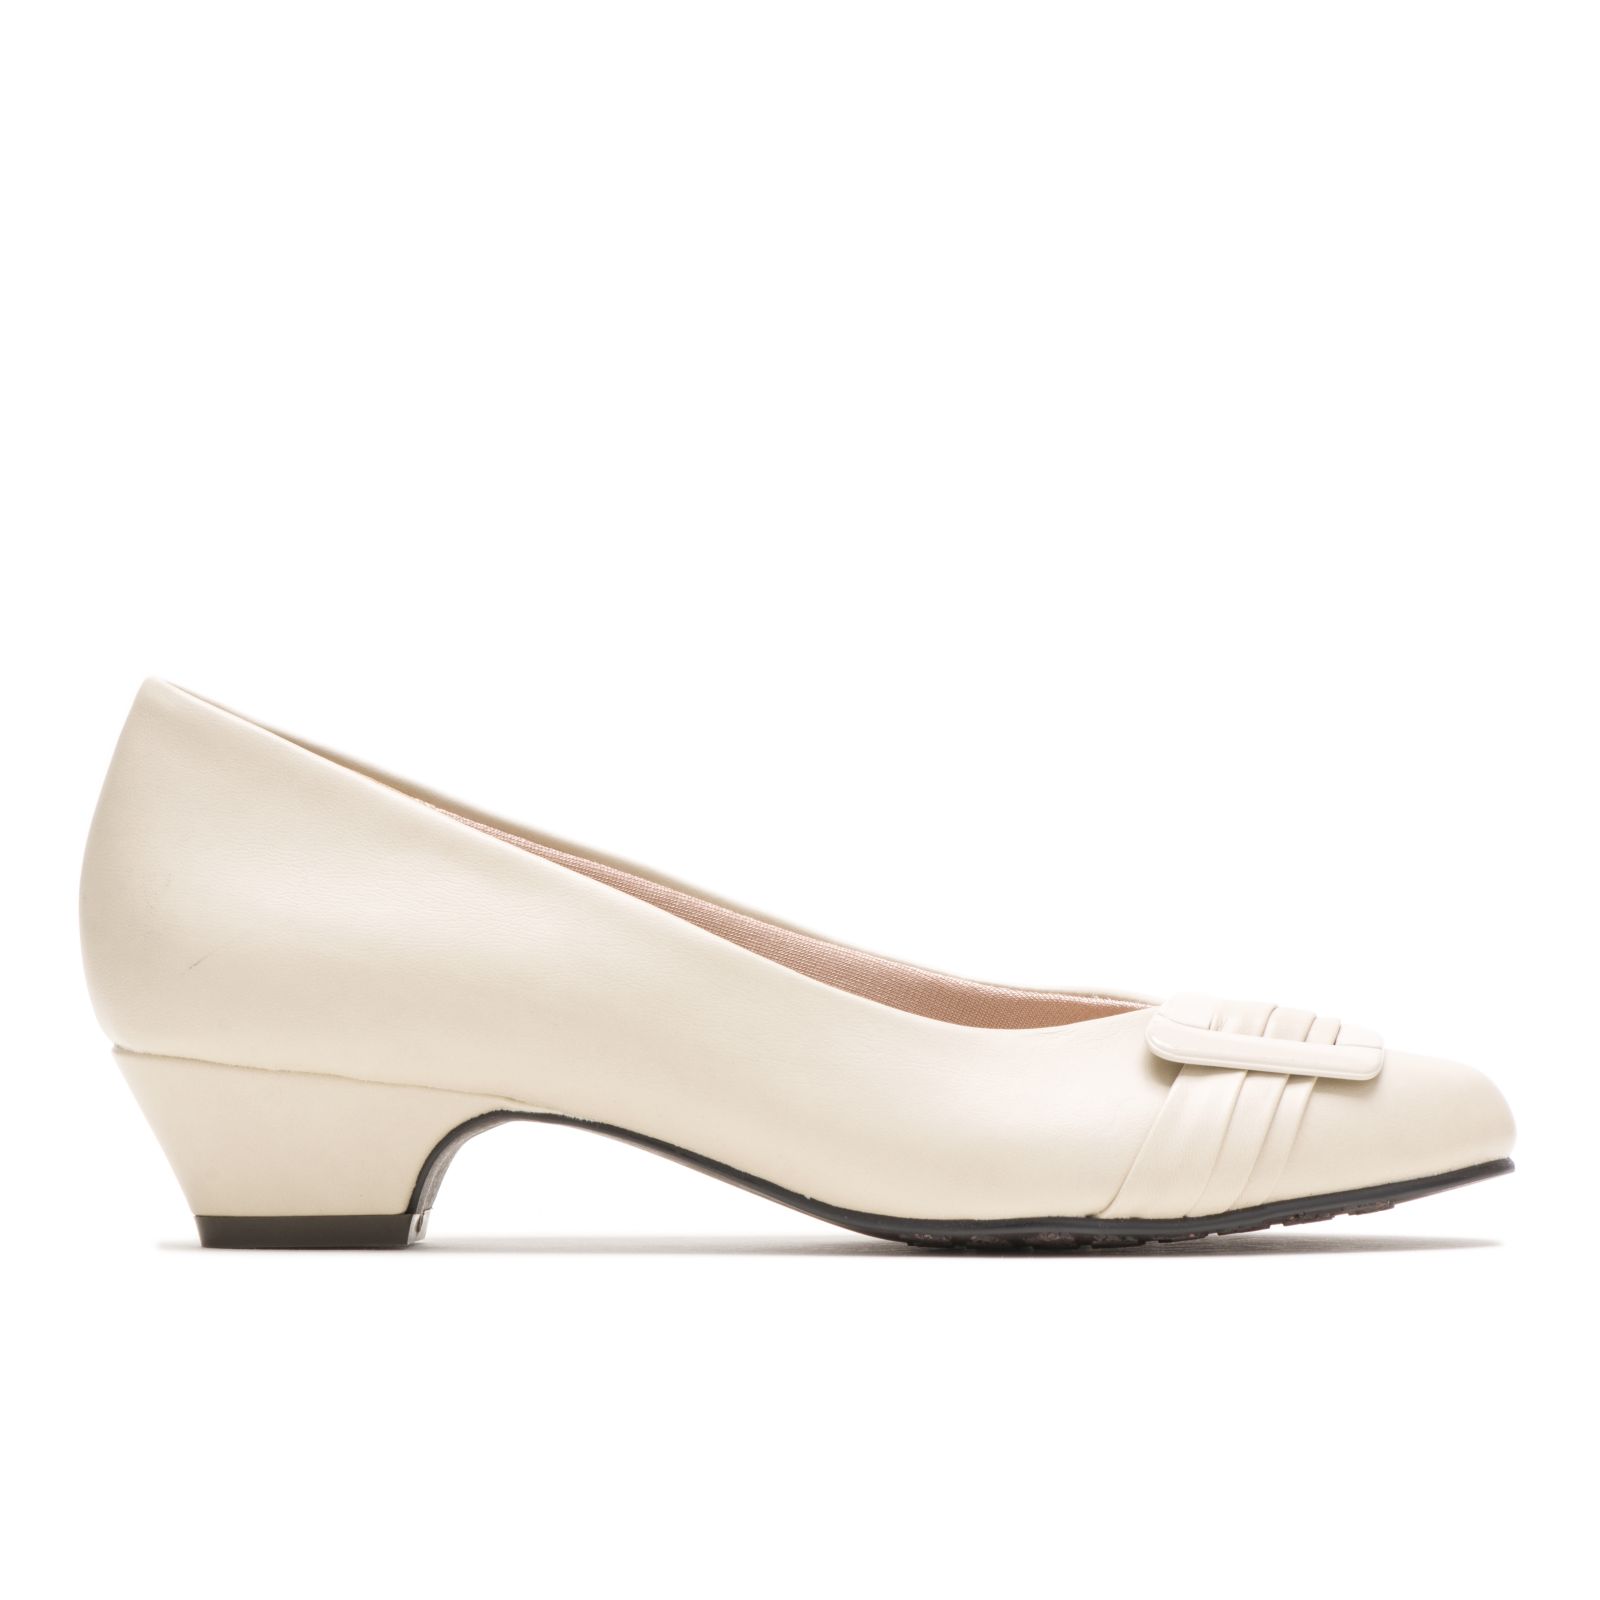 Soft Style Hush Puppies Pleats Be With You Mujer Beige | AEHVFTB-49